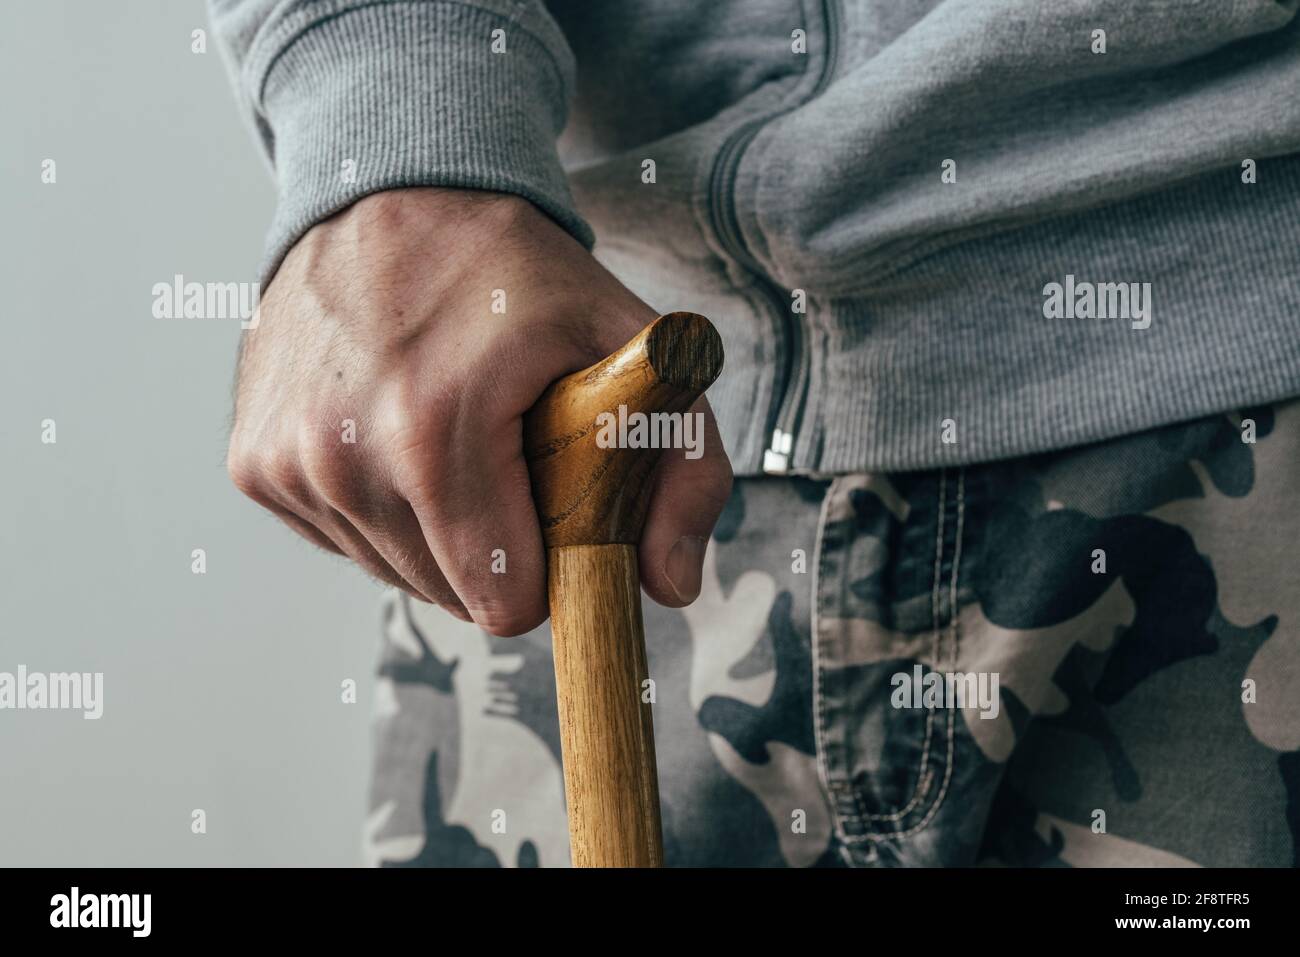 Man holding walking stick, close up of hand with selective focus Stock Photo